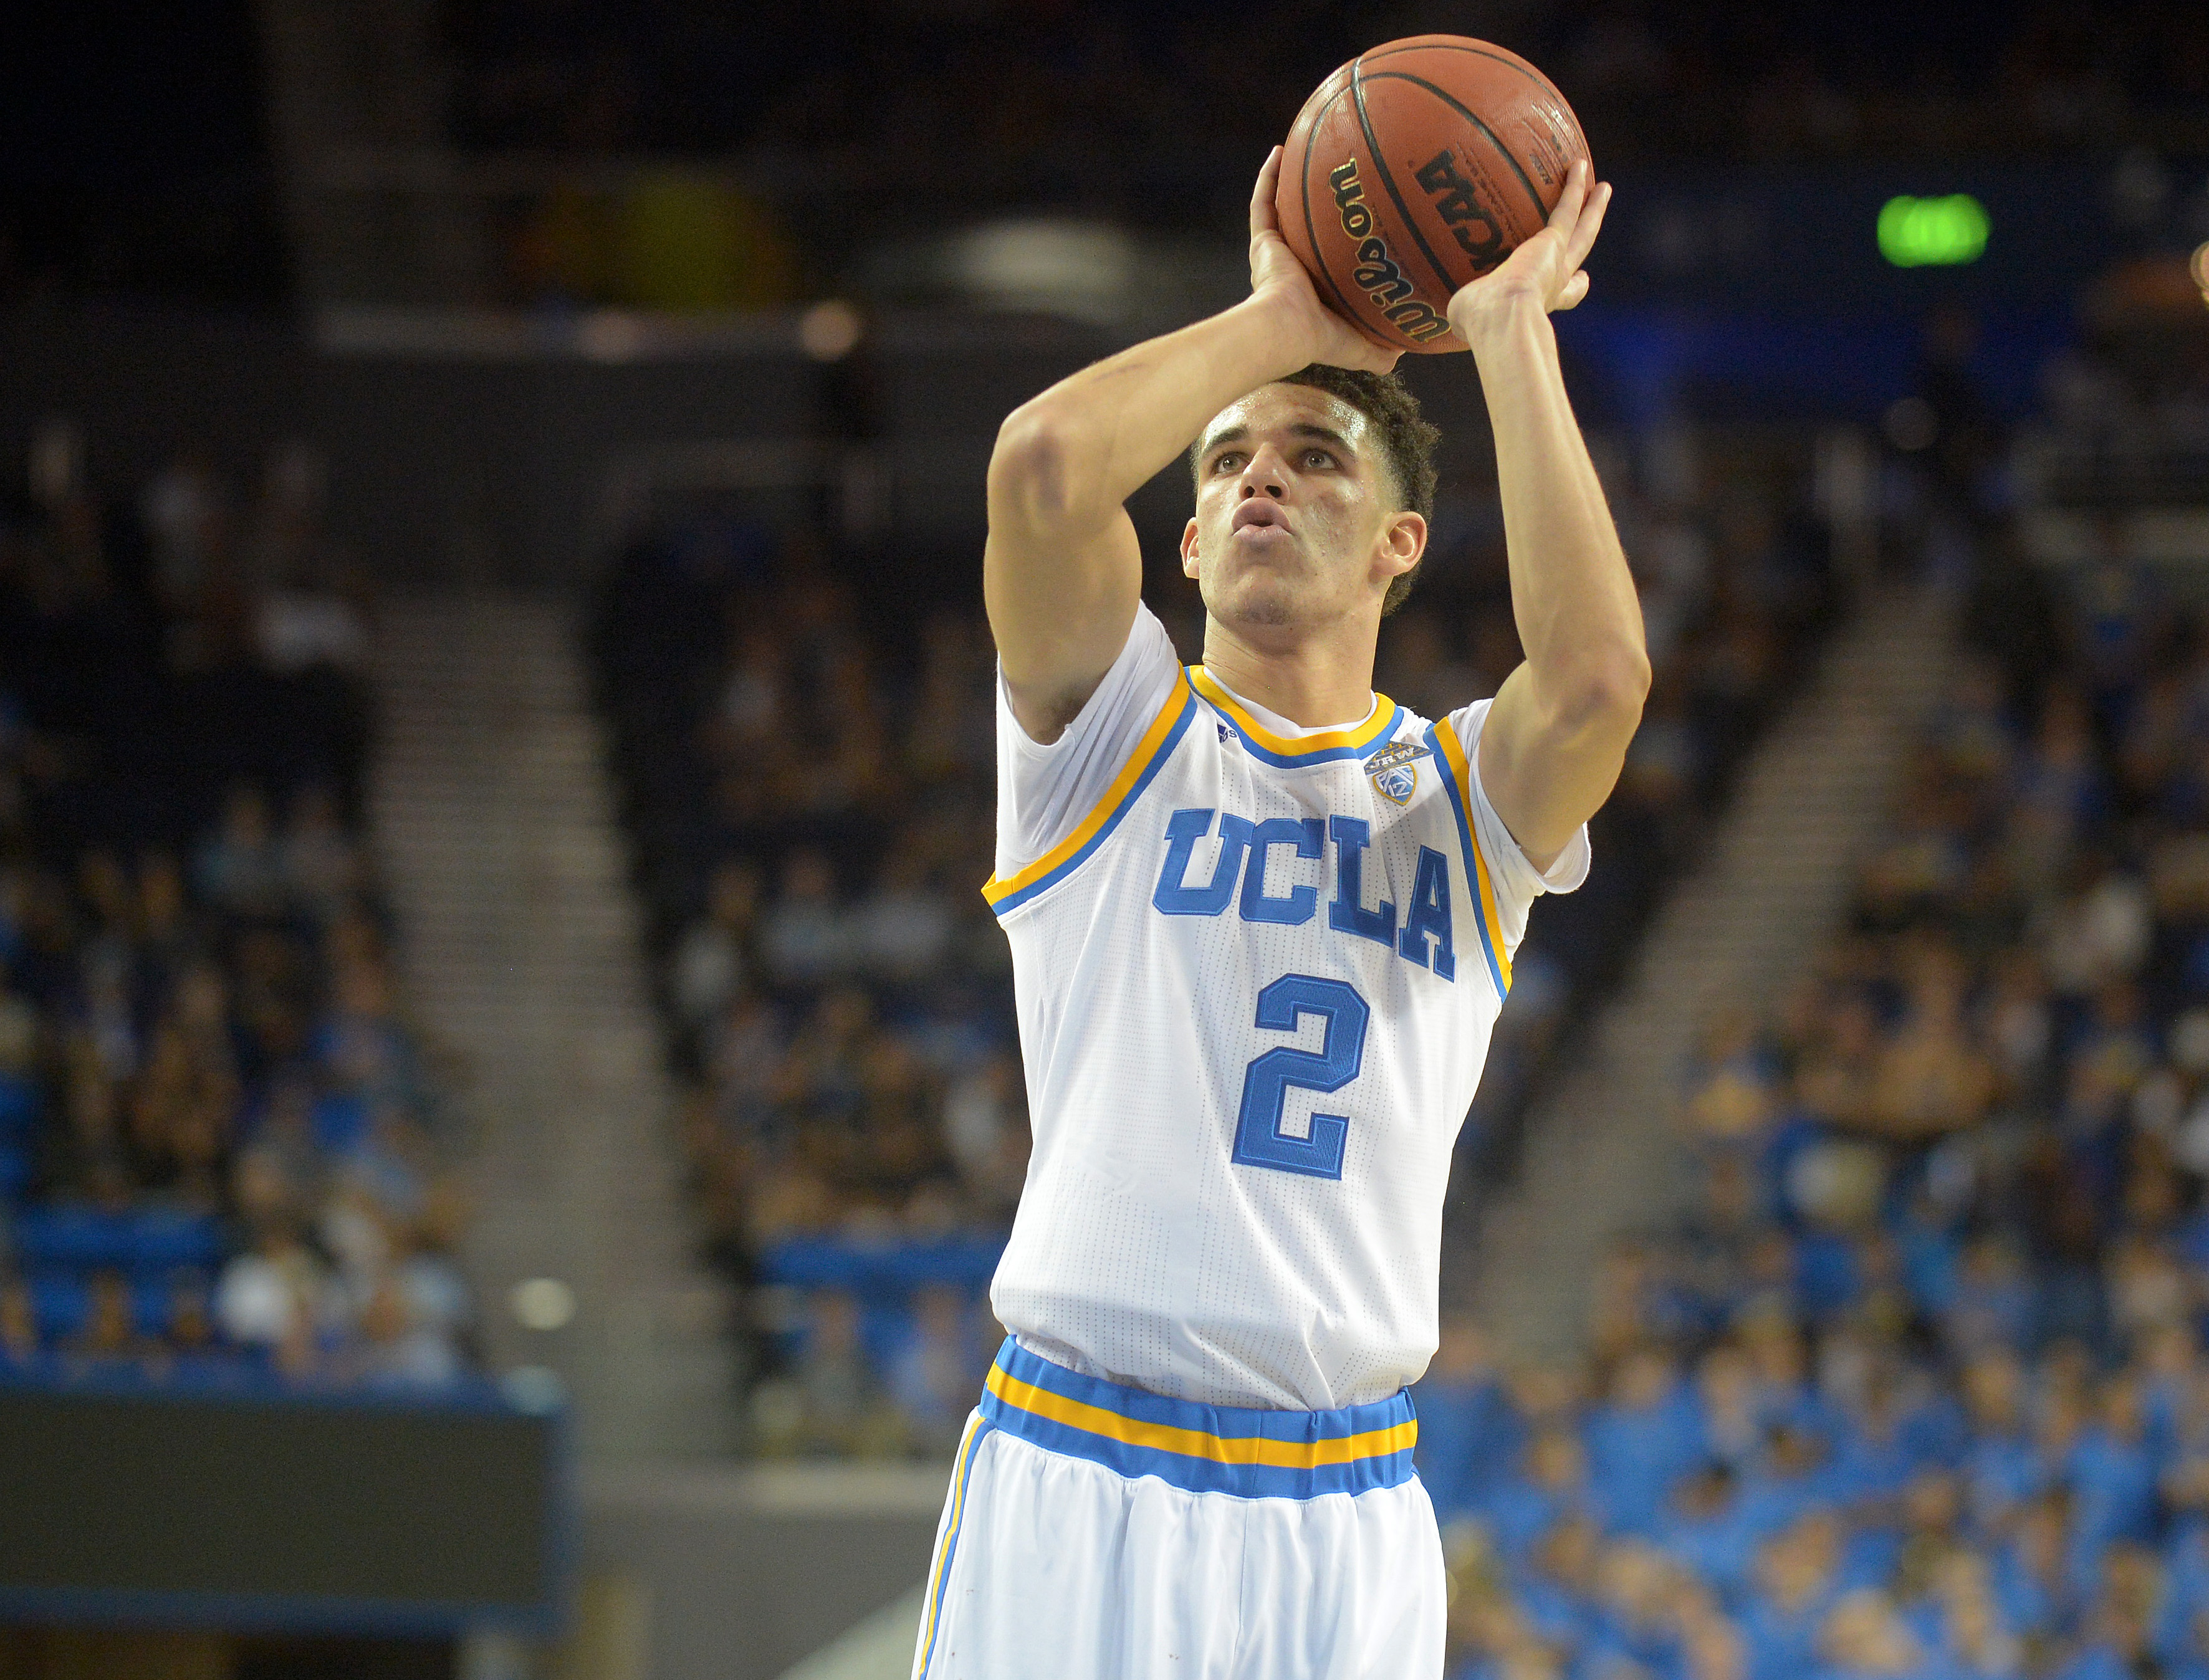 UCLA guard Lonzo Ball shoots a free throw during an exhibition